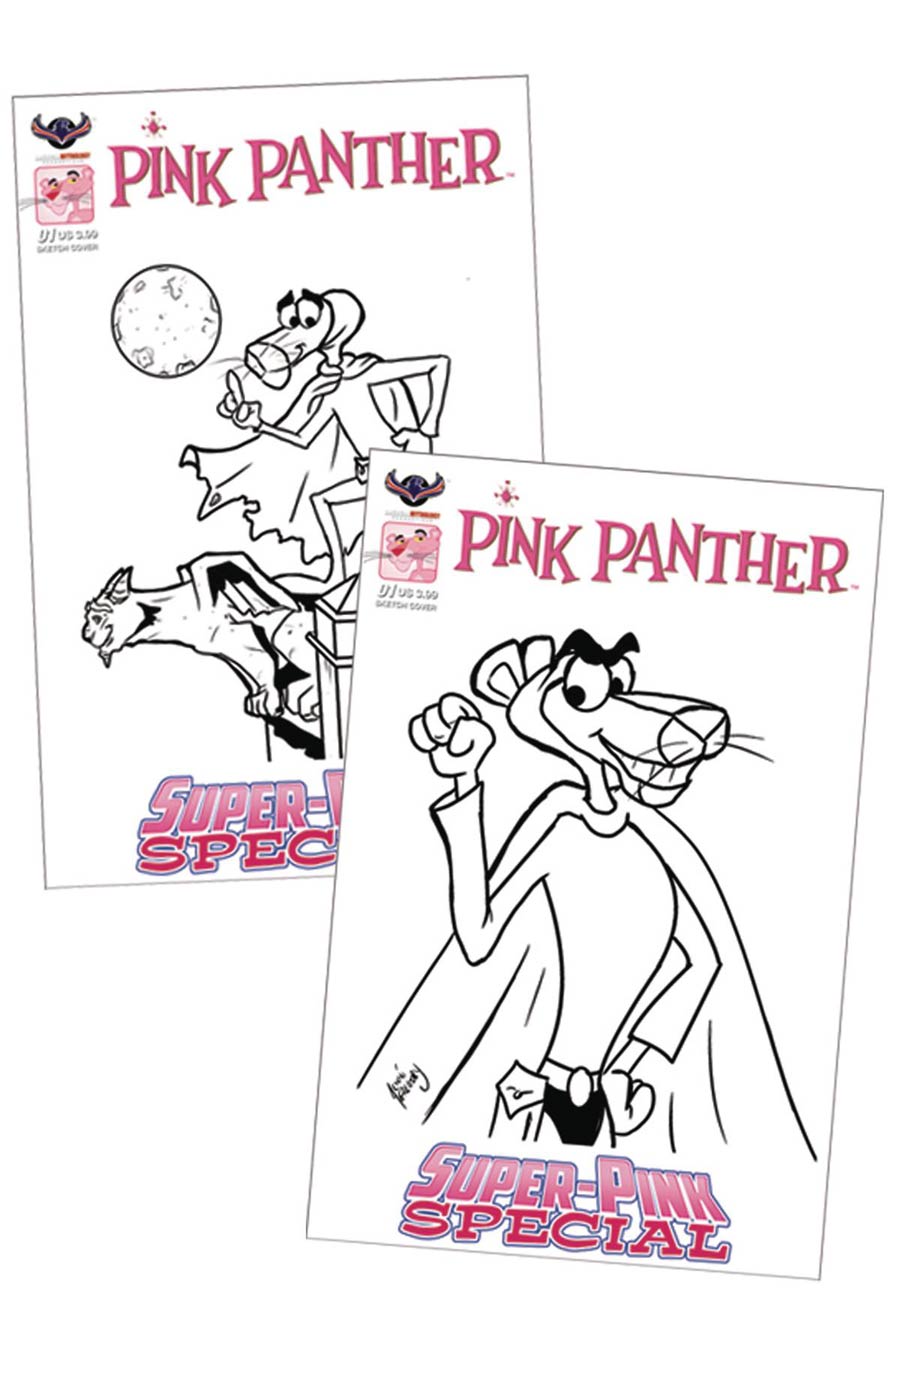 Pink Panther Super-Pink Special Cover F Variant Jenni Gregory Hand-Drawn Sketch Cover